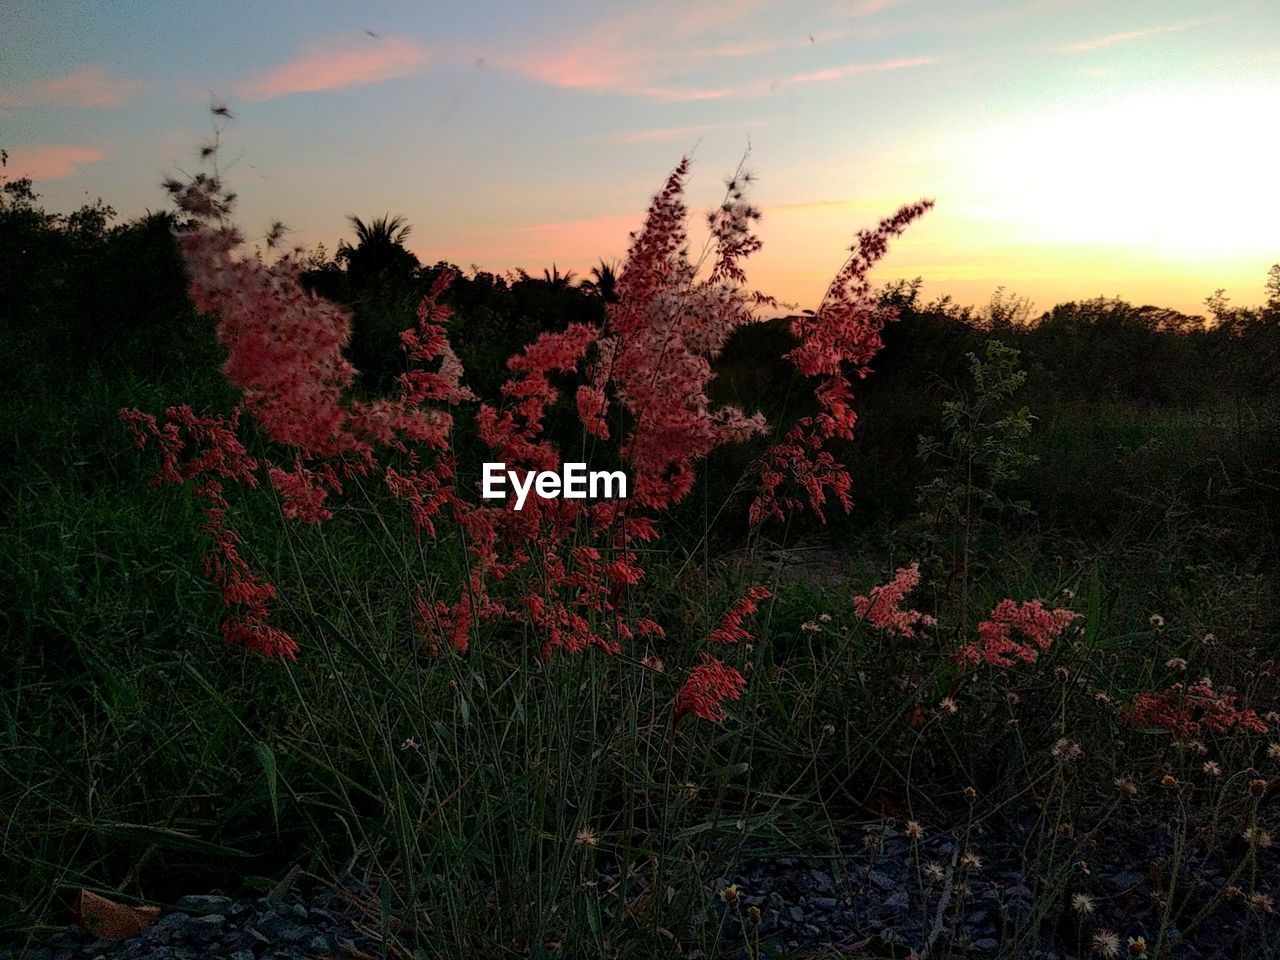 FLOWERING PLANTS ON FIELD DURING SUNSET